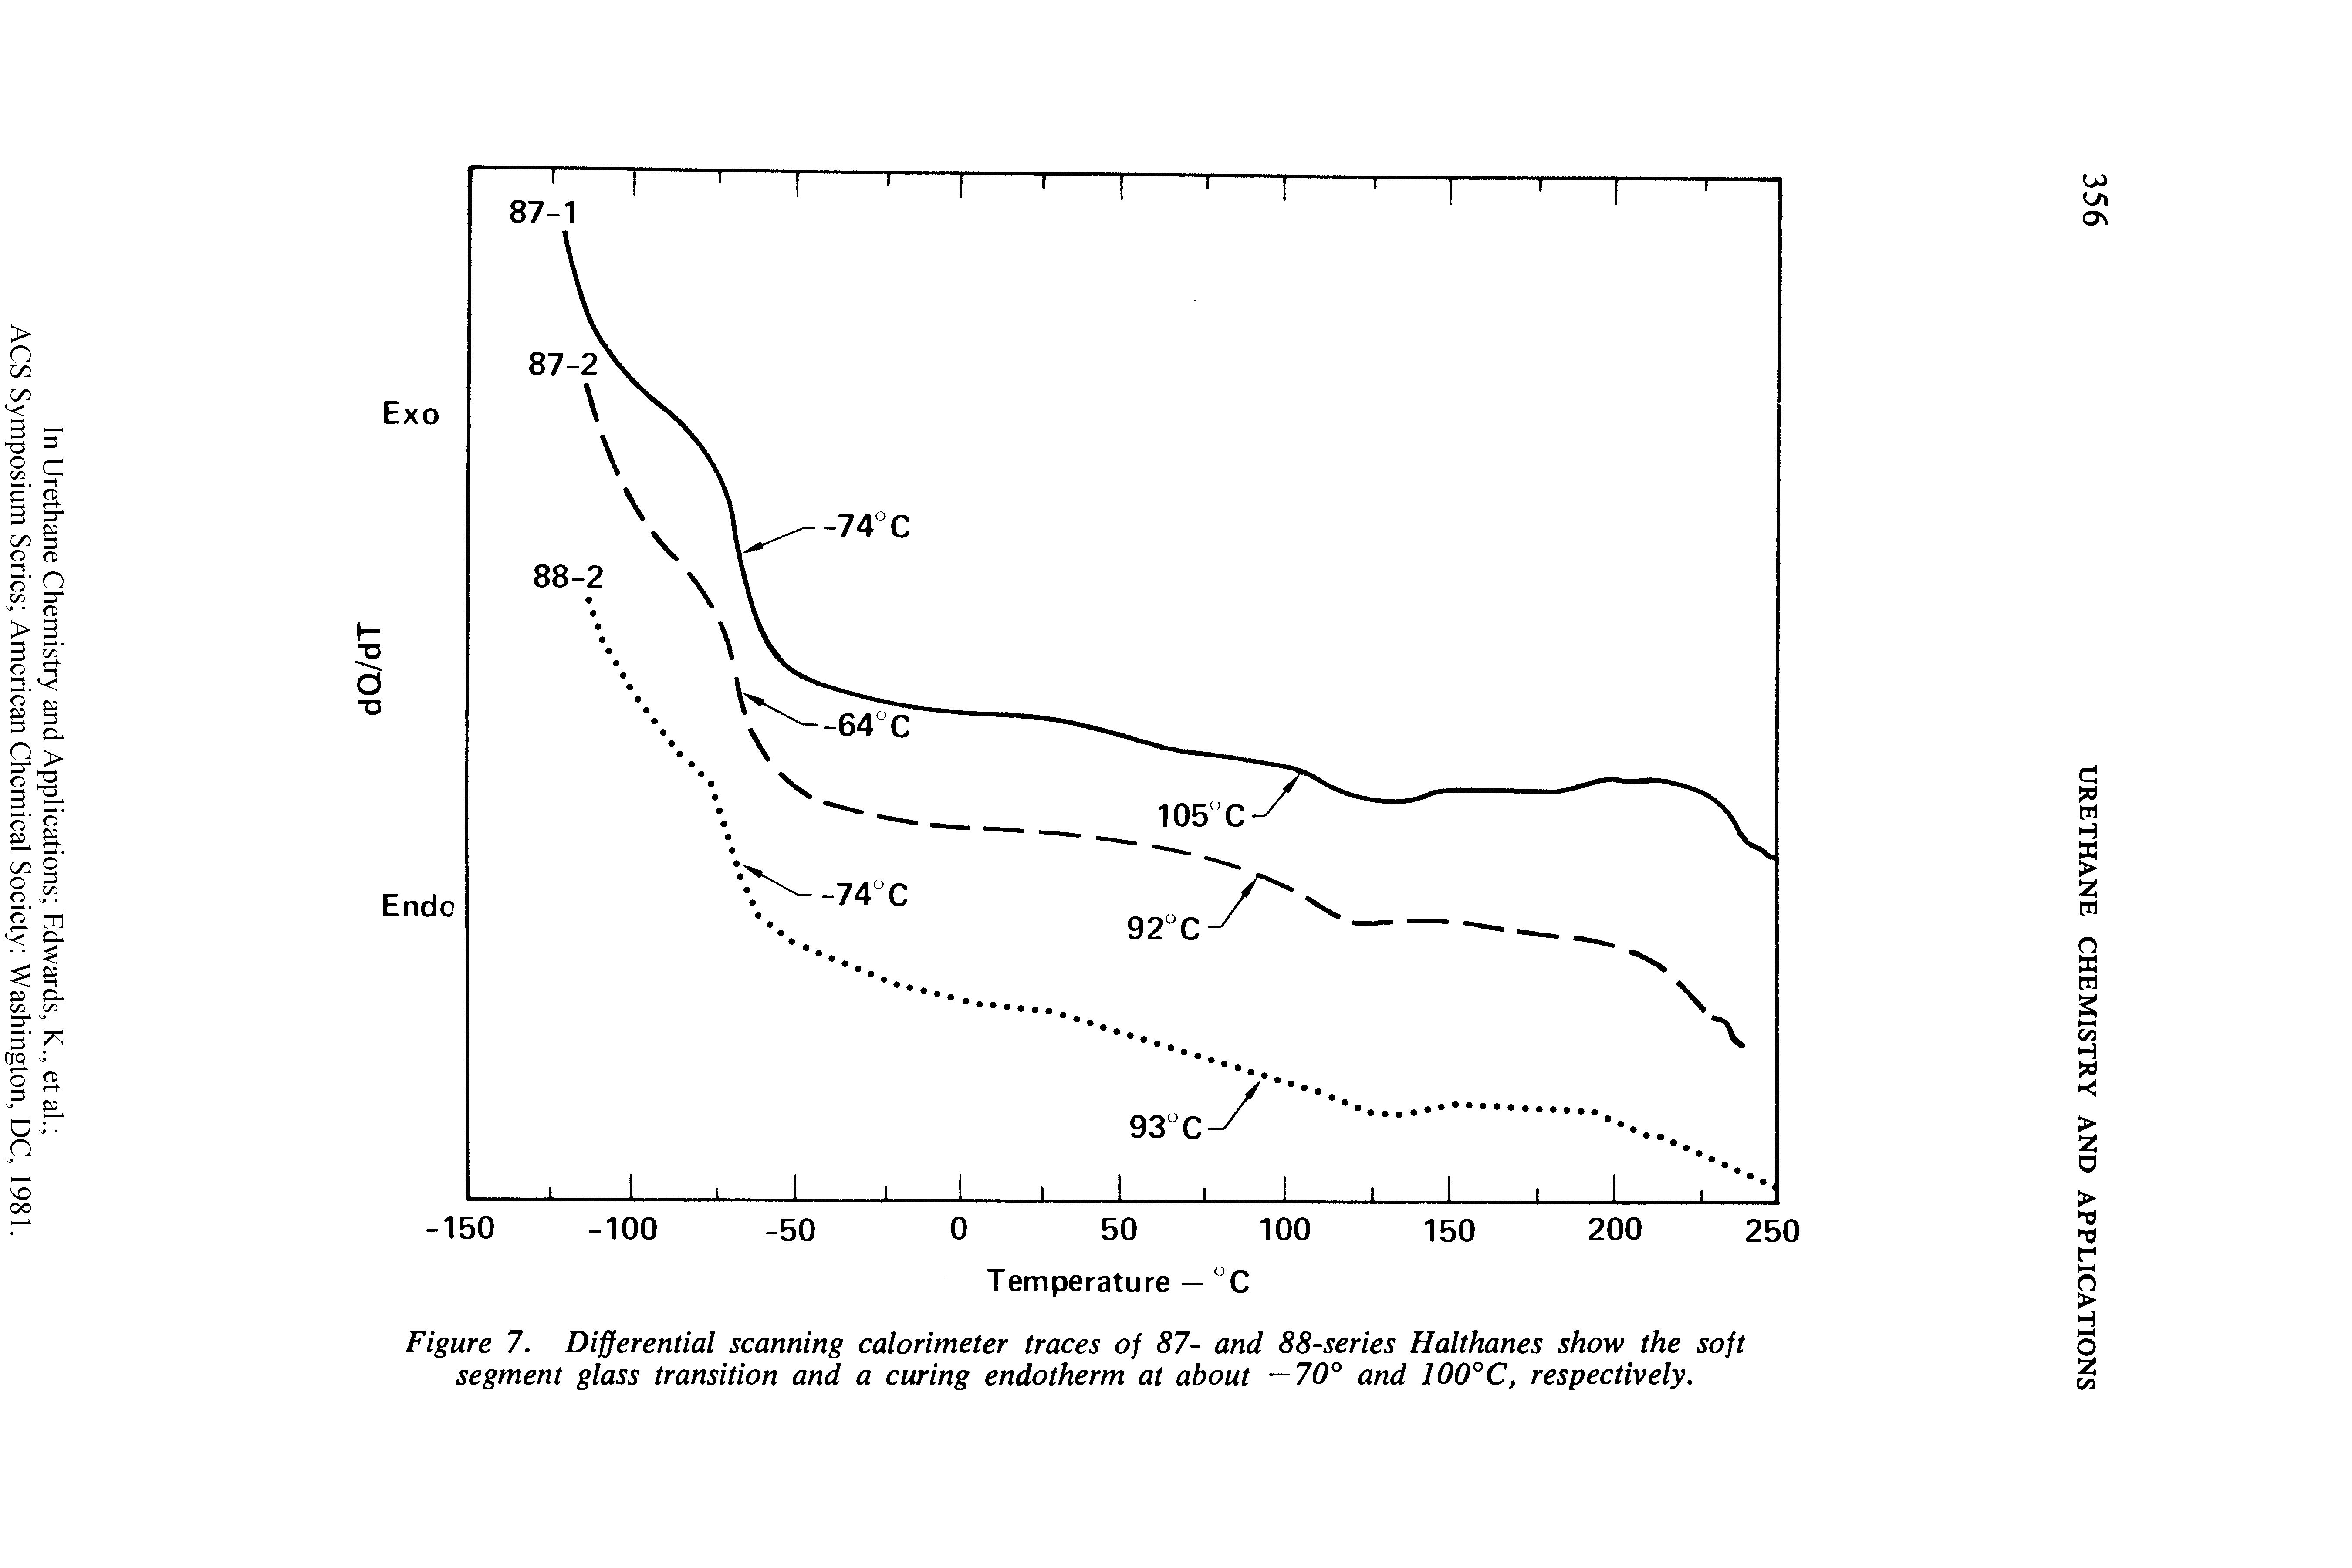 Figure 7. Differential scanning calorimeter traces of 87- and 88-series Halthanes show the soft segment glass transition and a curing endotherm at about —70° and 100°C, respectively.